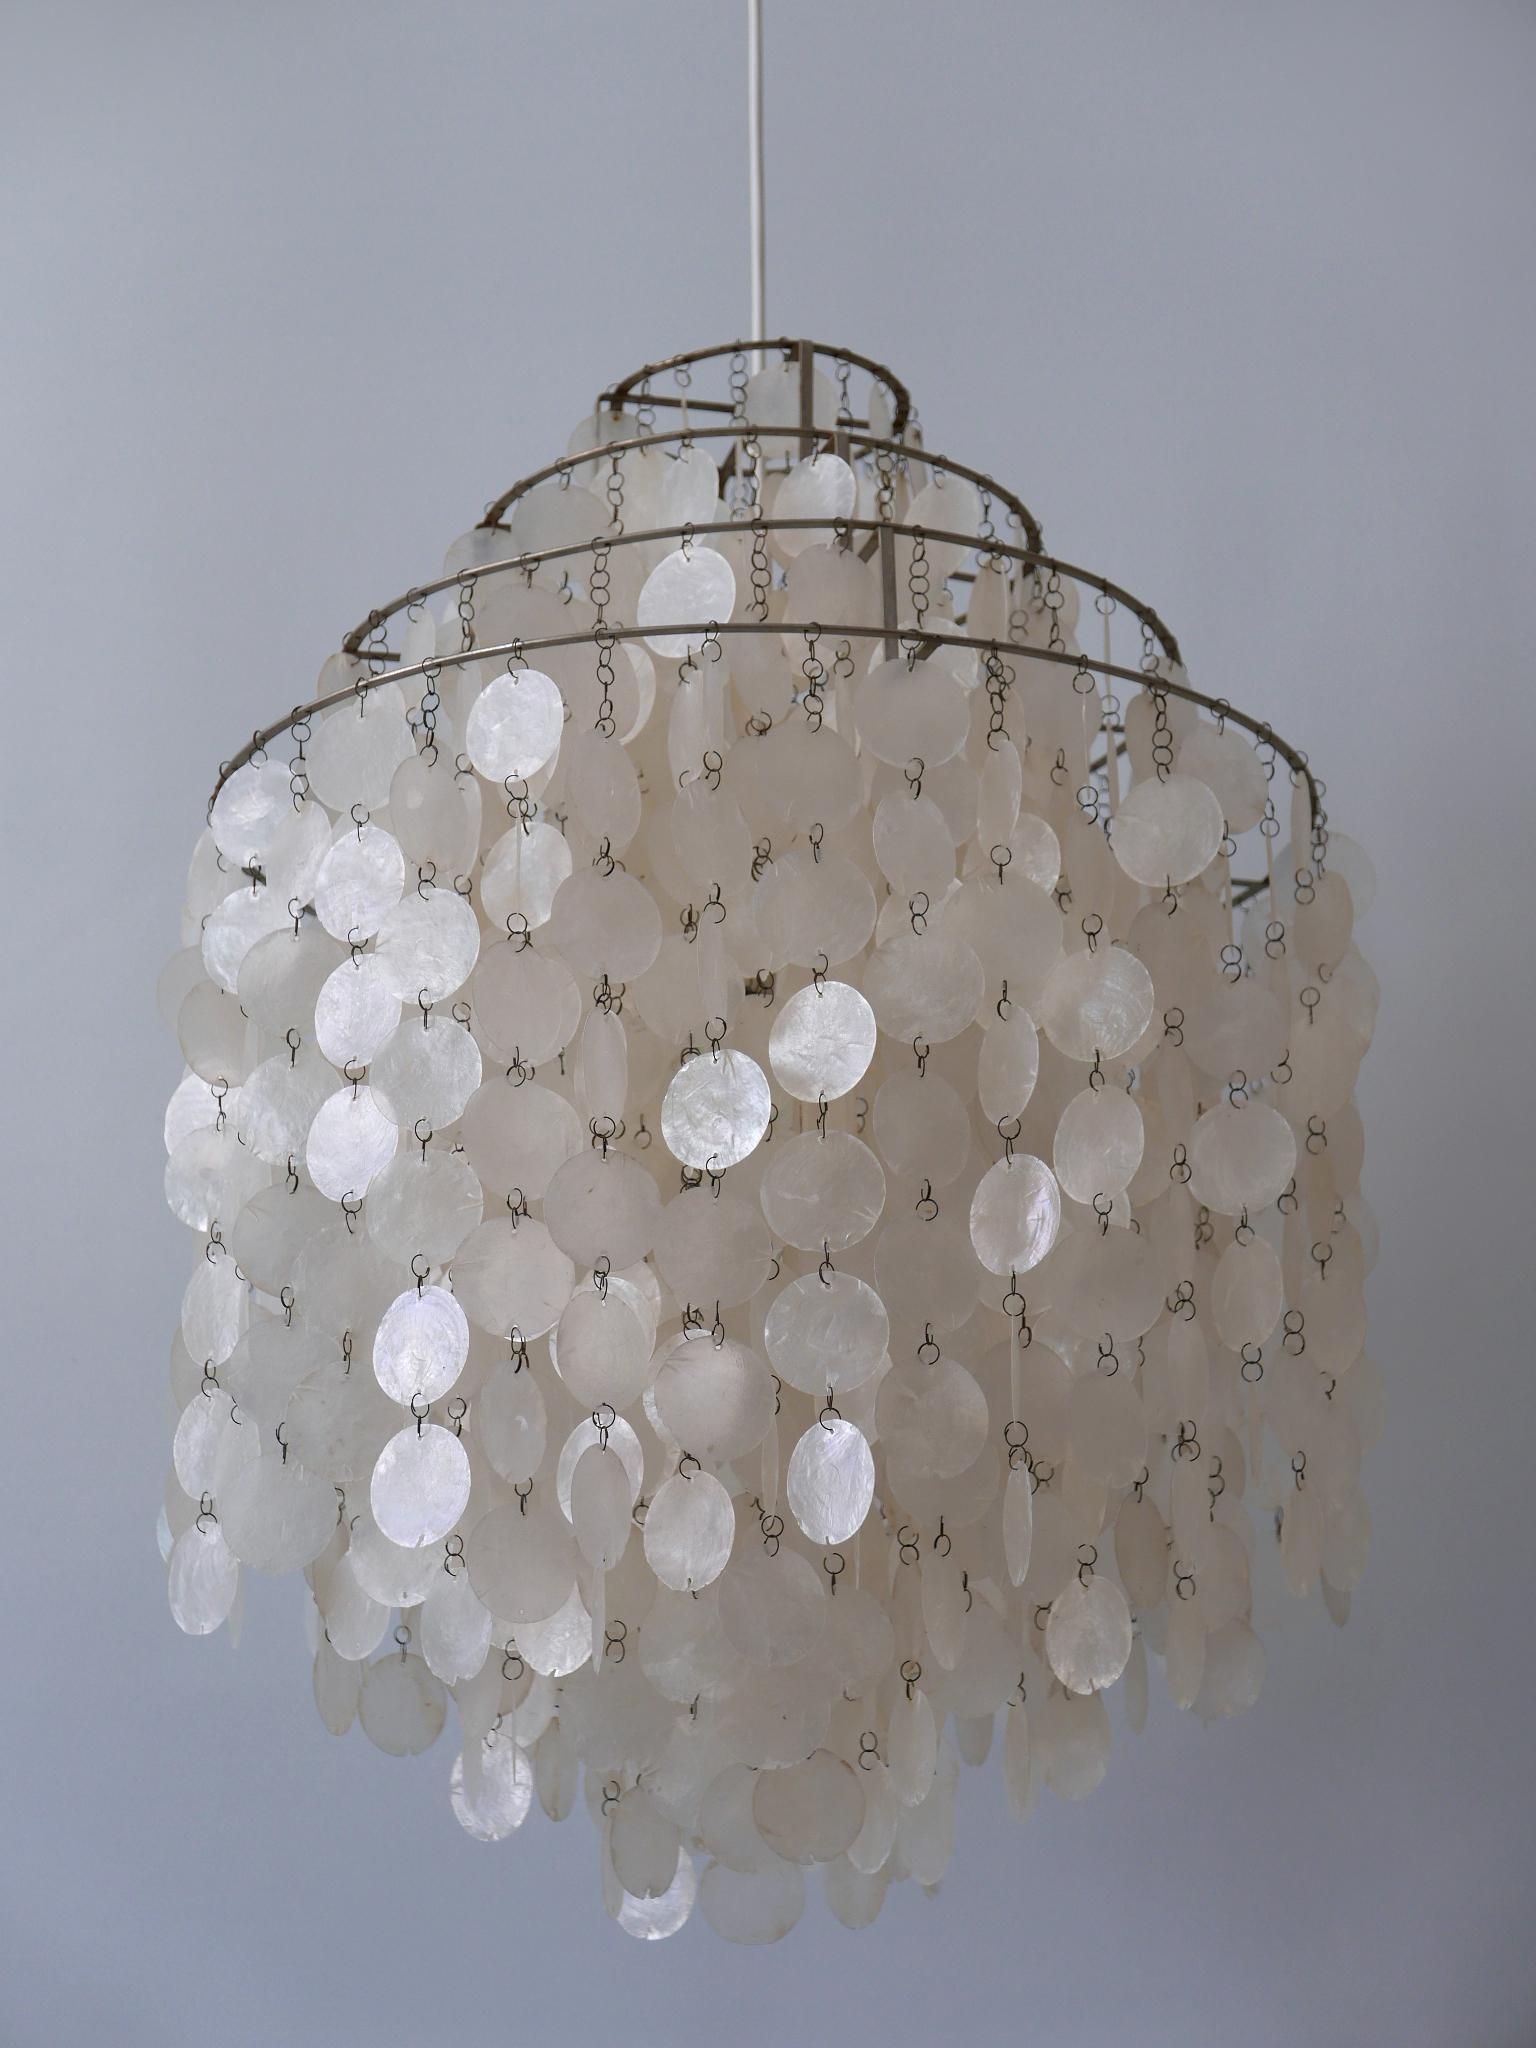 Early Pendant Lamp or Chandelier FUN 0DM by Verner Panton for Lüber CH 1960s For Sale 1